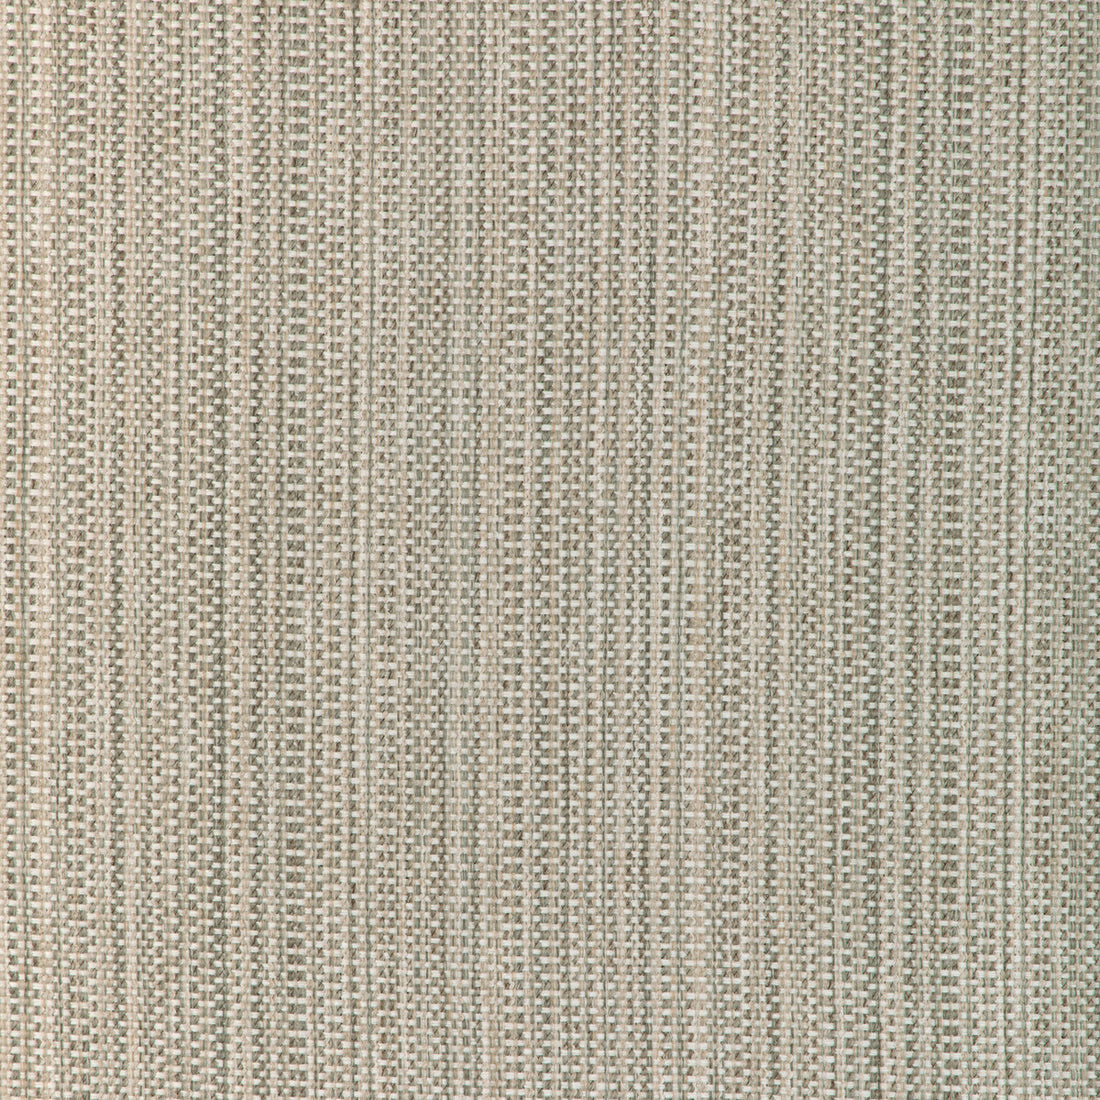 Kravet Smart fabric in 37018-611 color - pattern 37018.611.0 - by Kravet Smart in the Gis collection